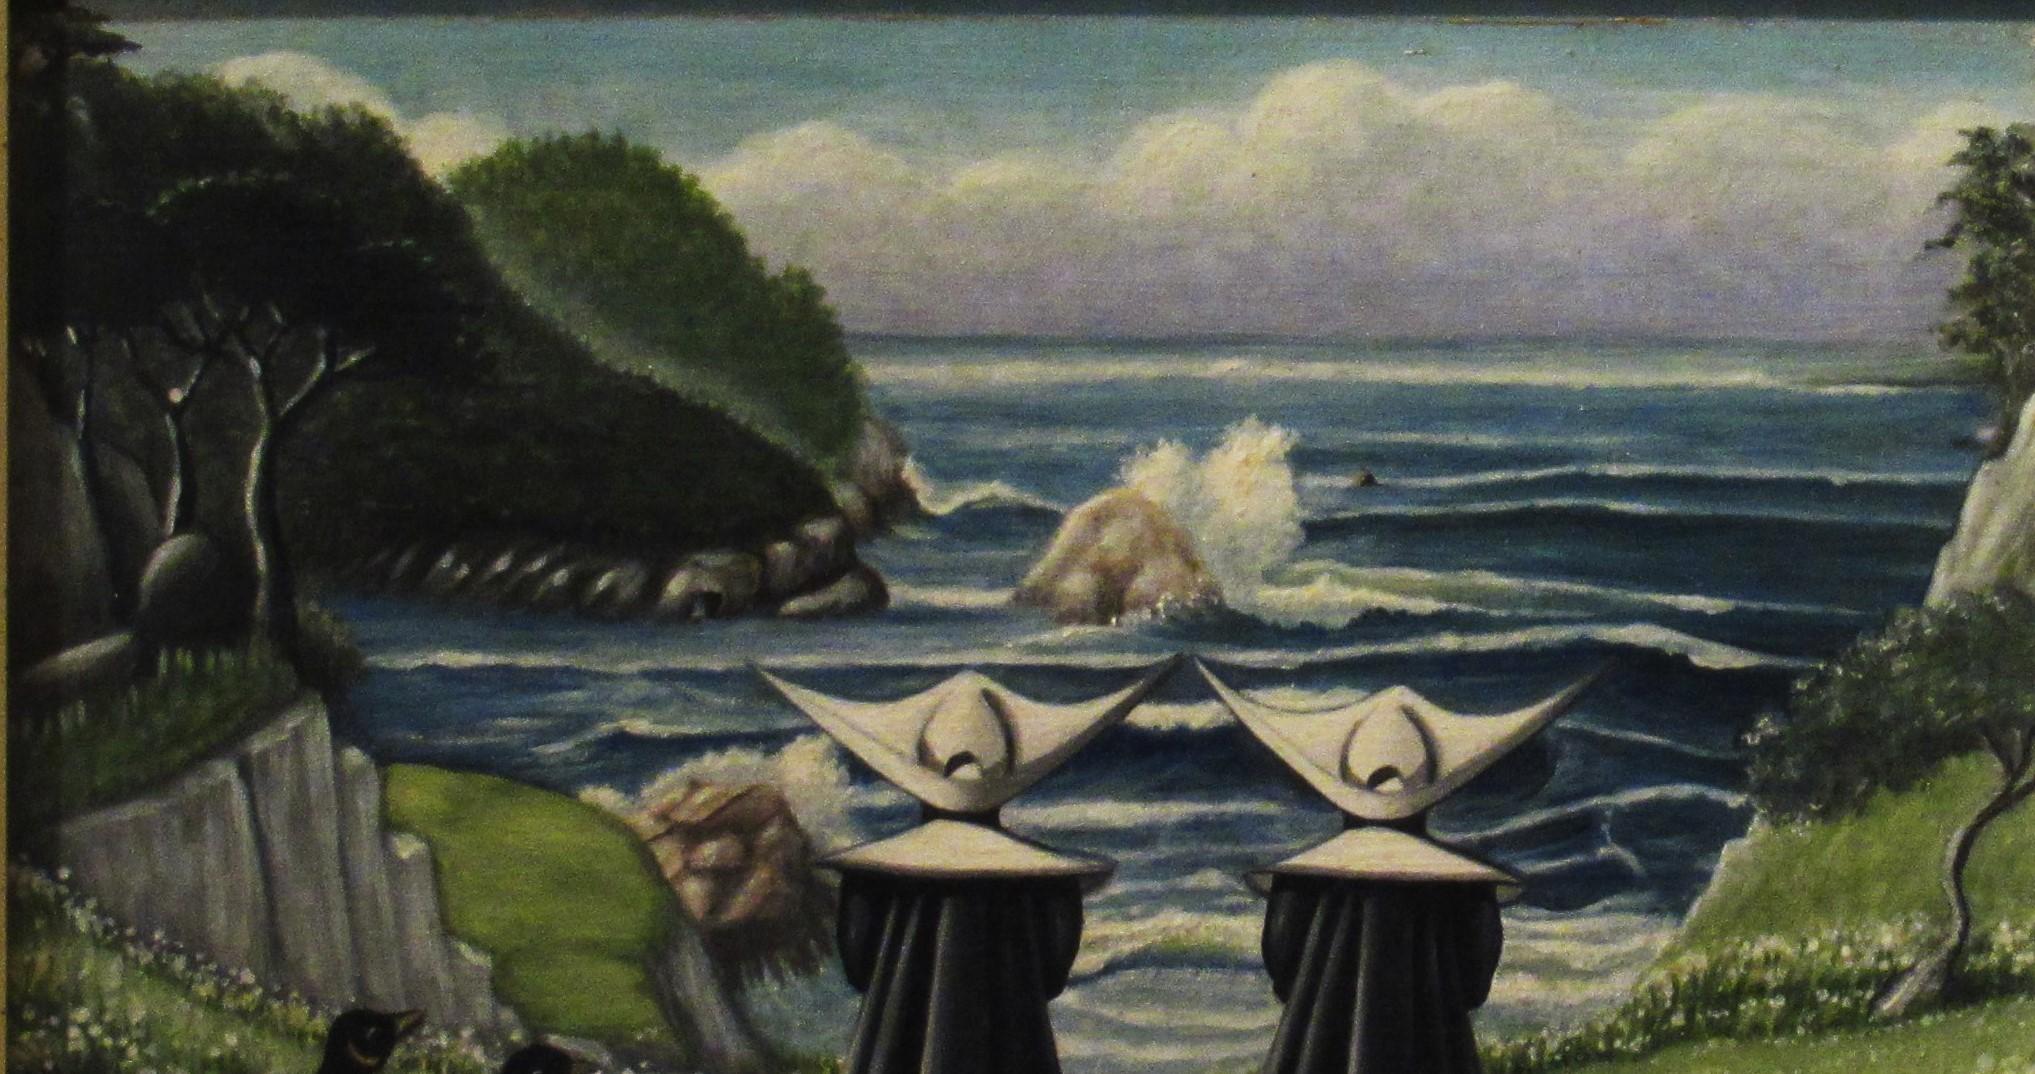 Two Nuns Facing the Ocean - Realist Painting by Joan Wilkie